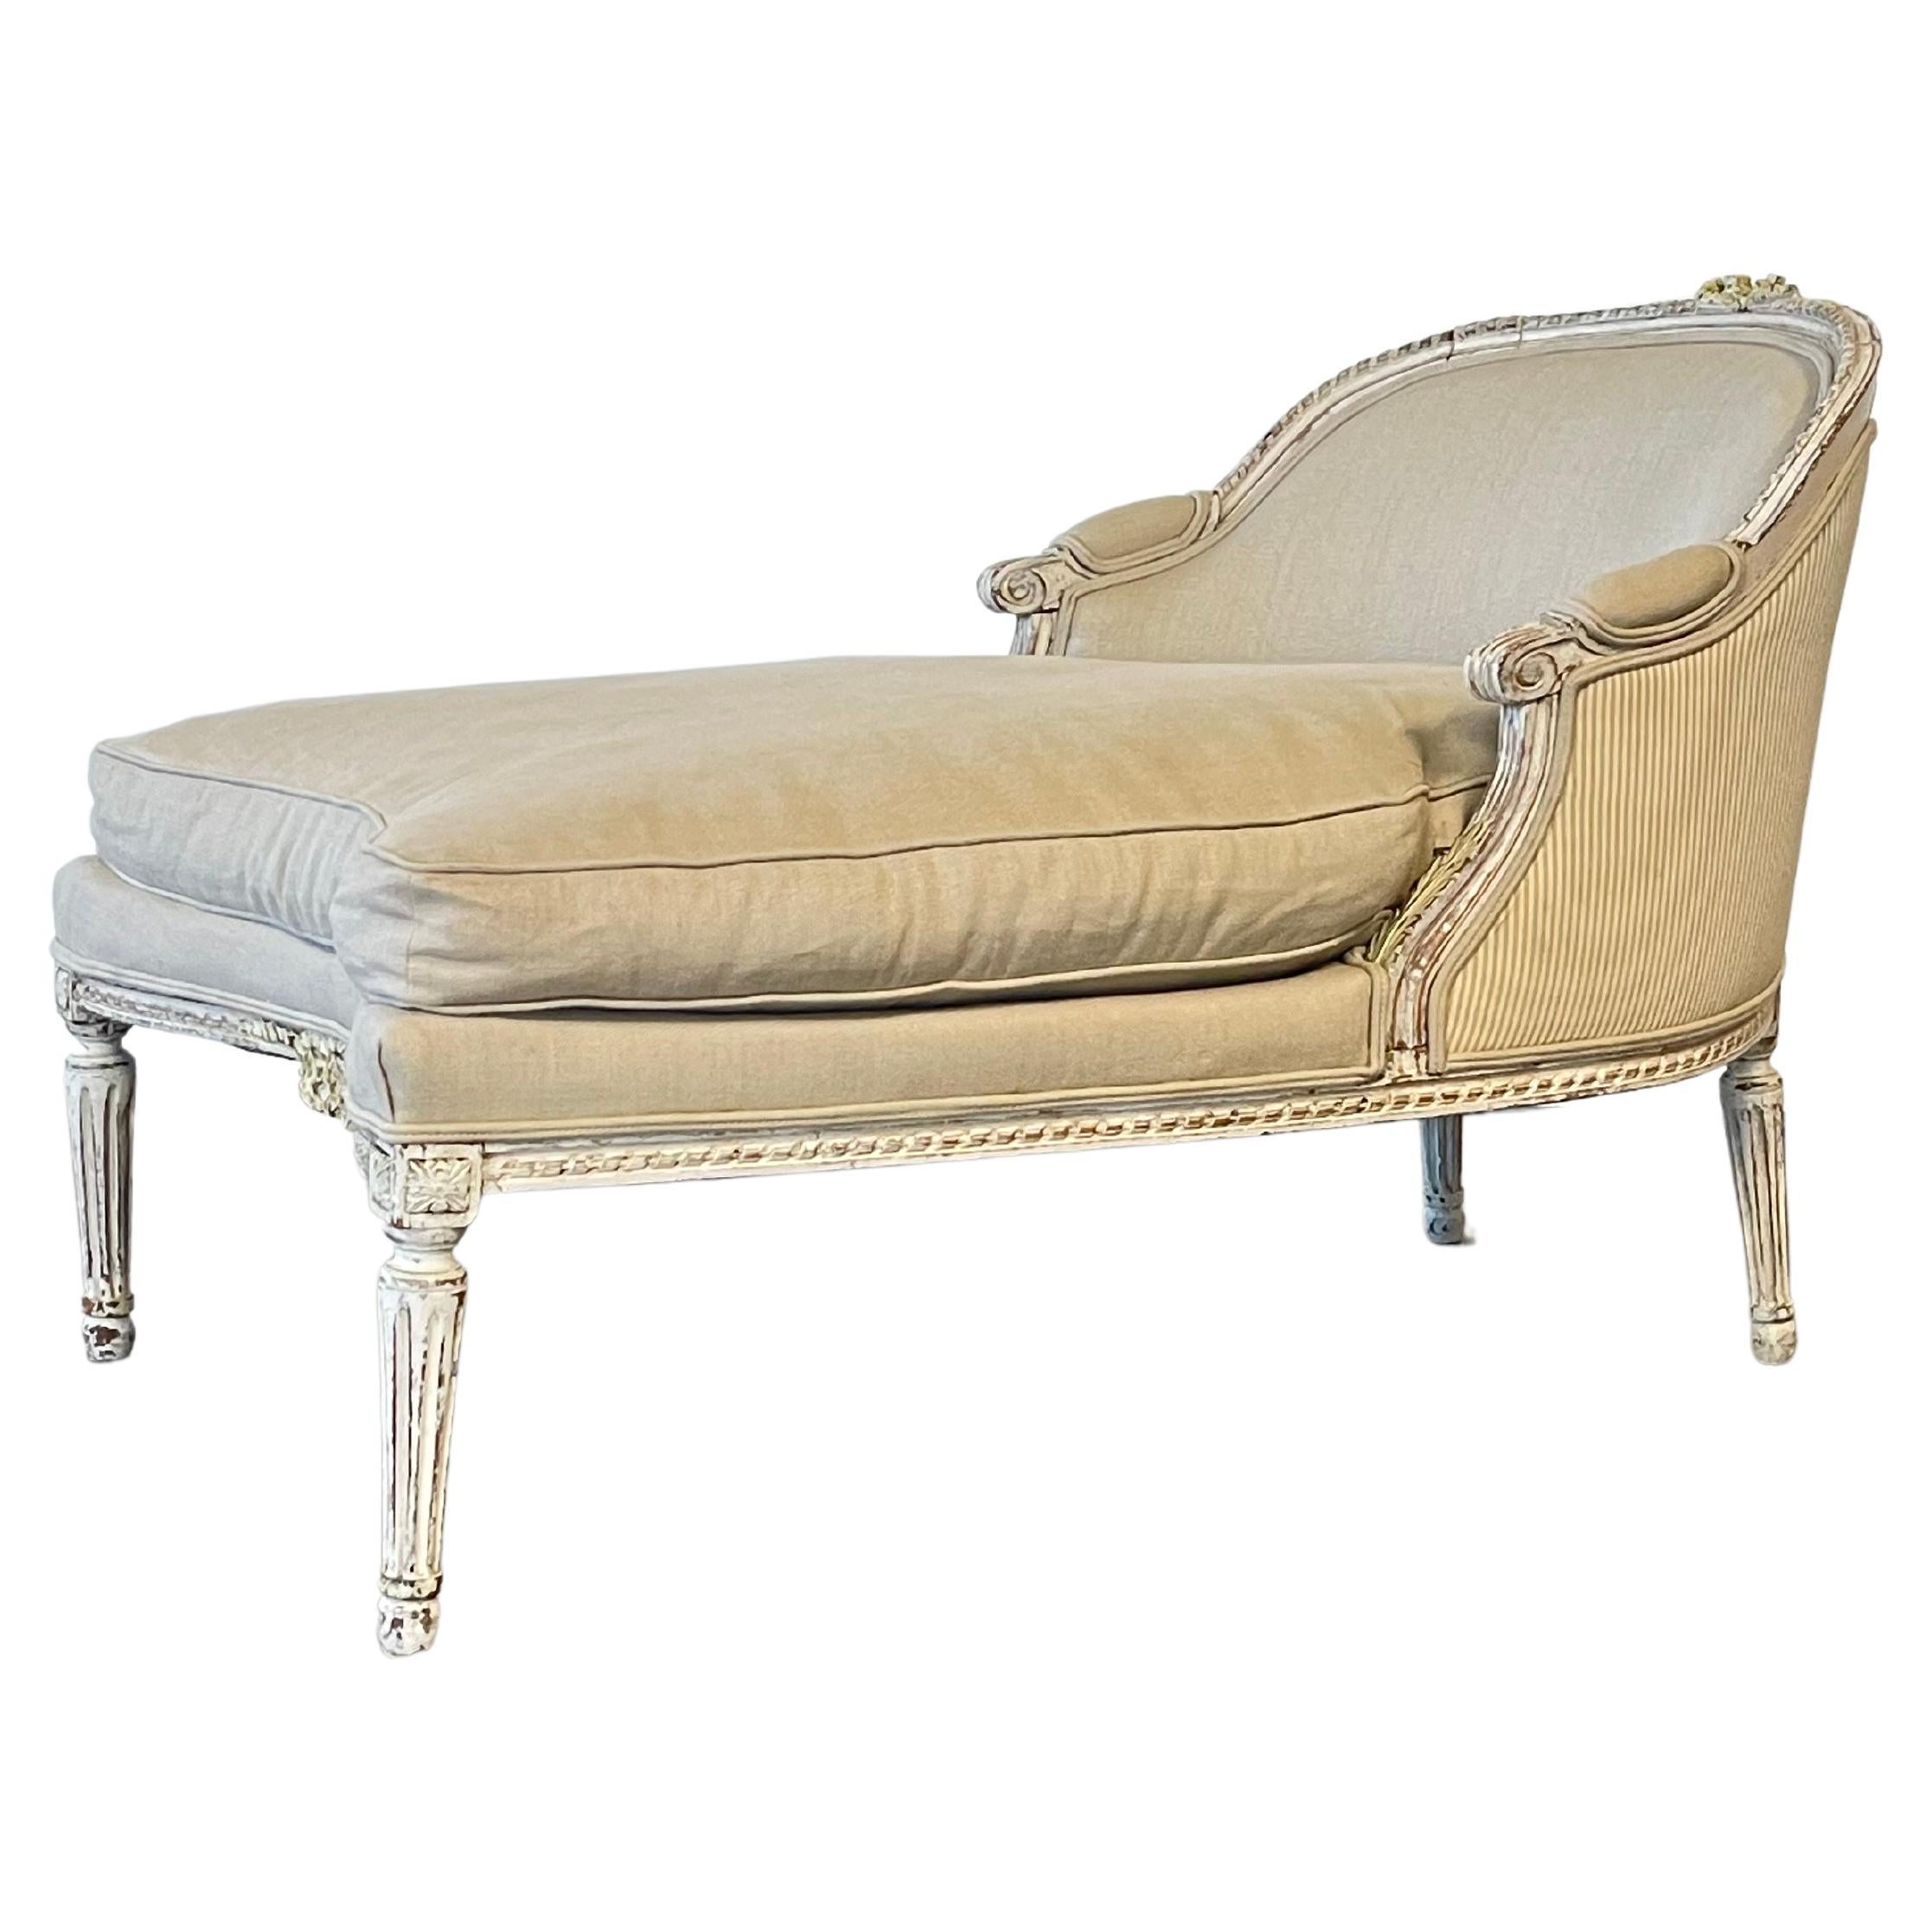 Beautiful French Louis XVI Chaise Lounge Upholstered in Thick Linen